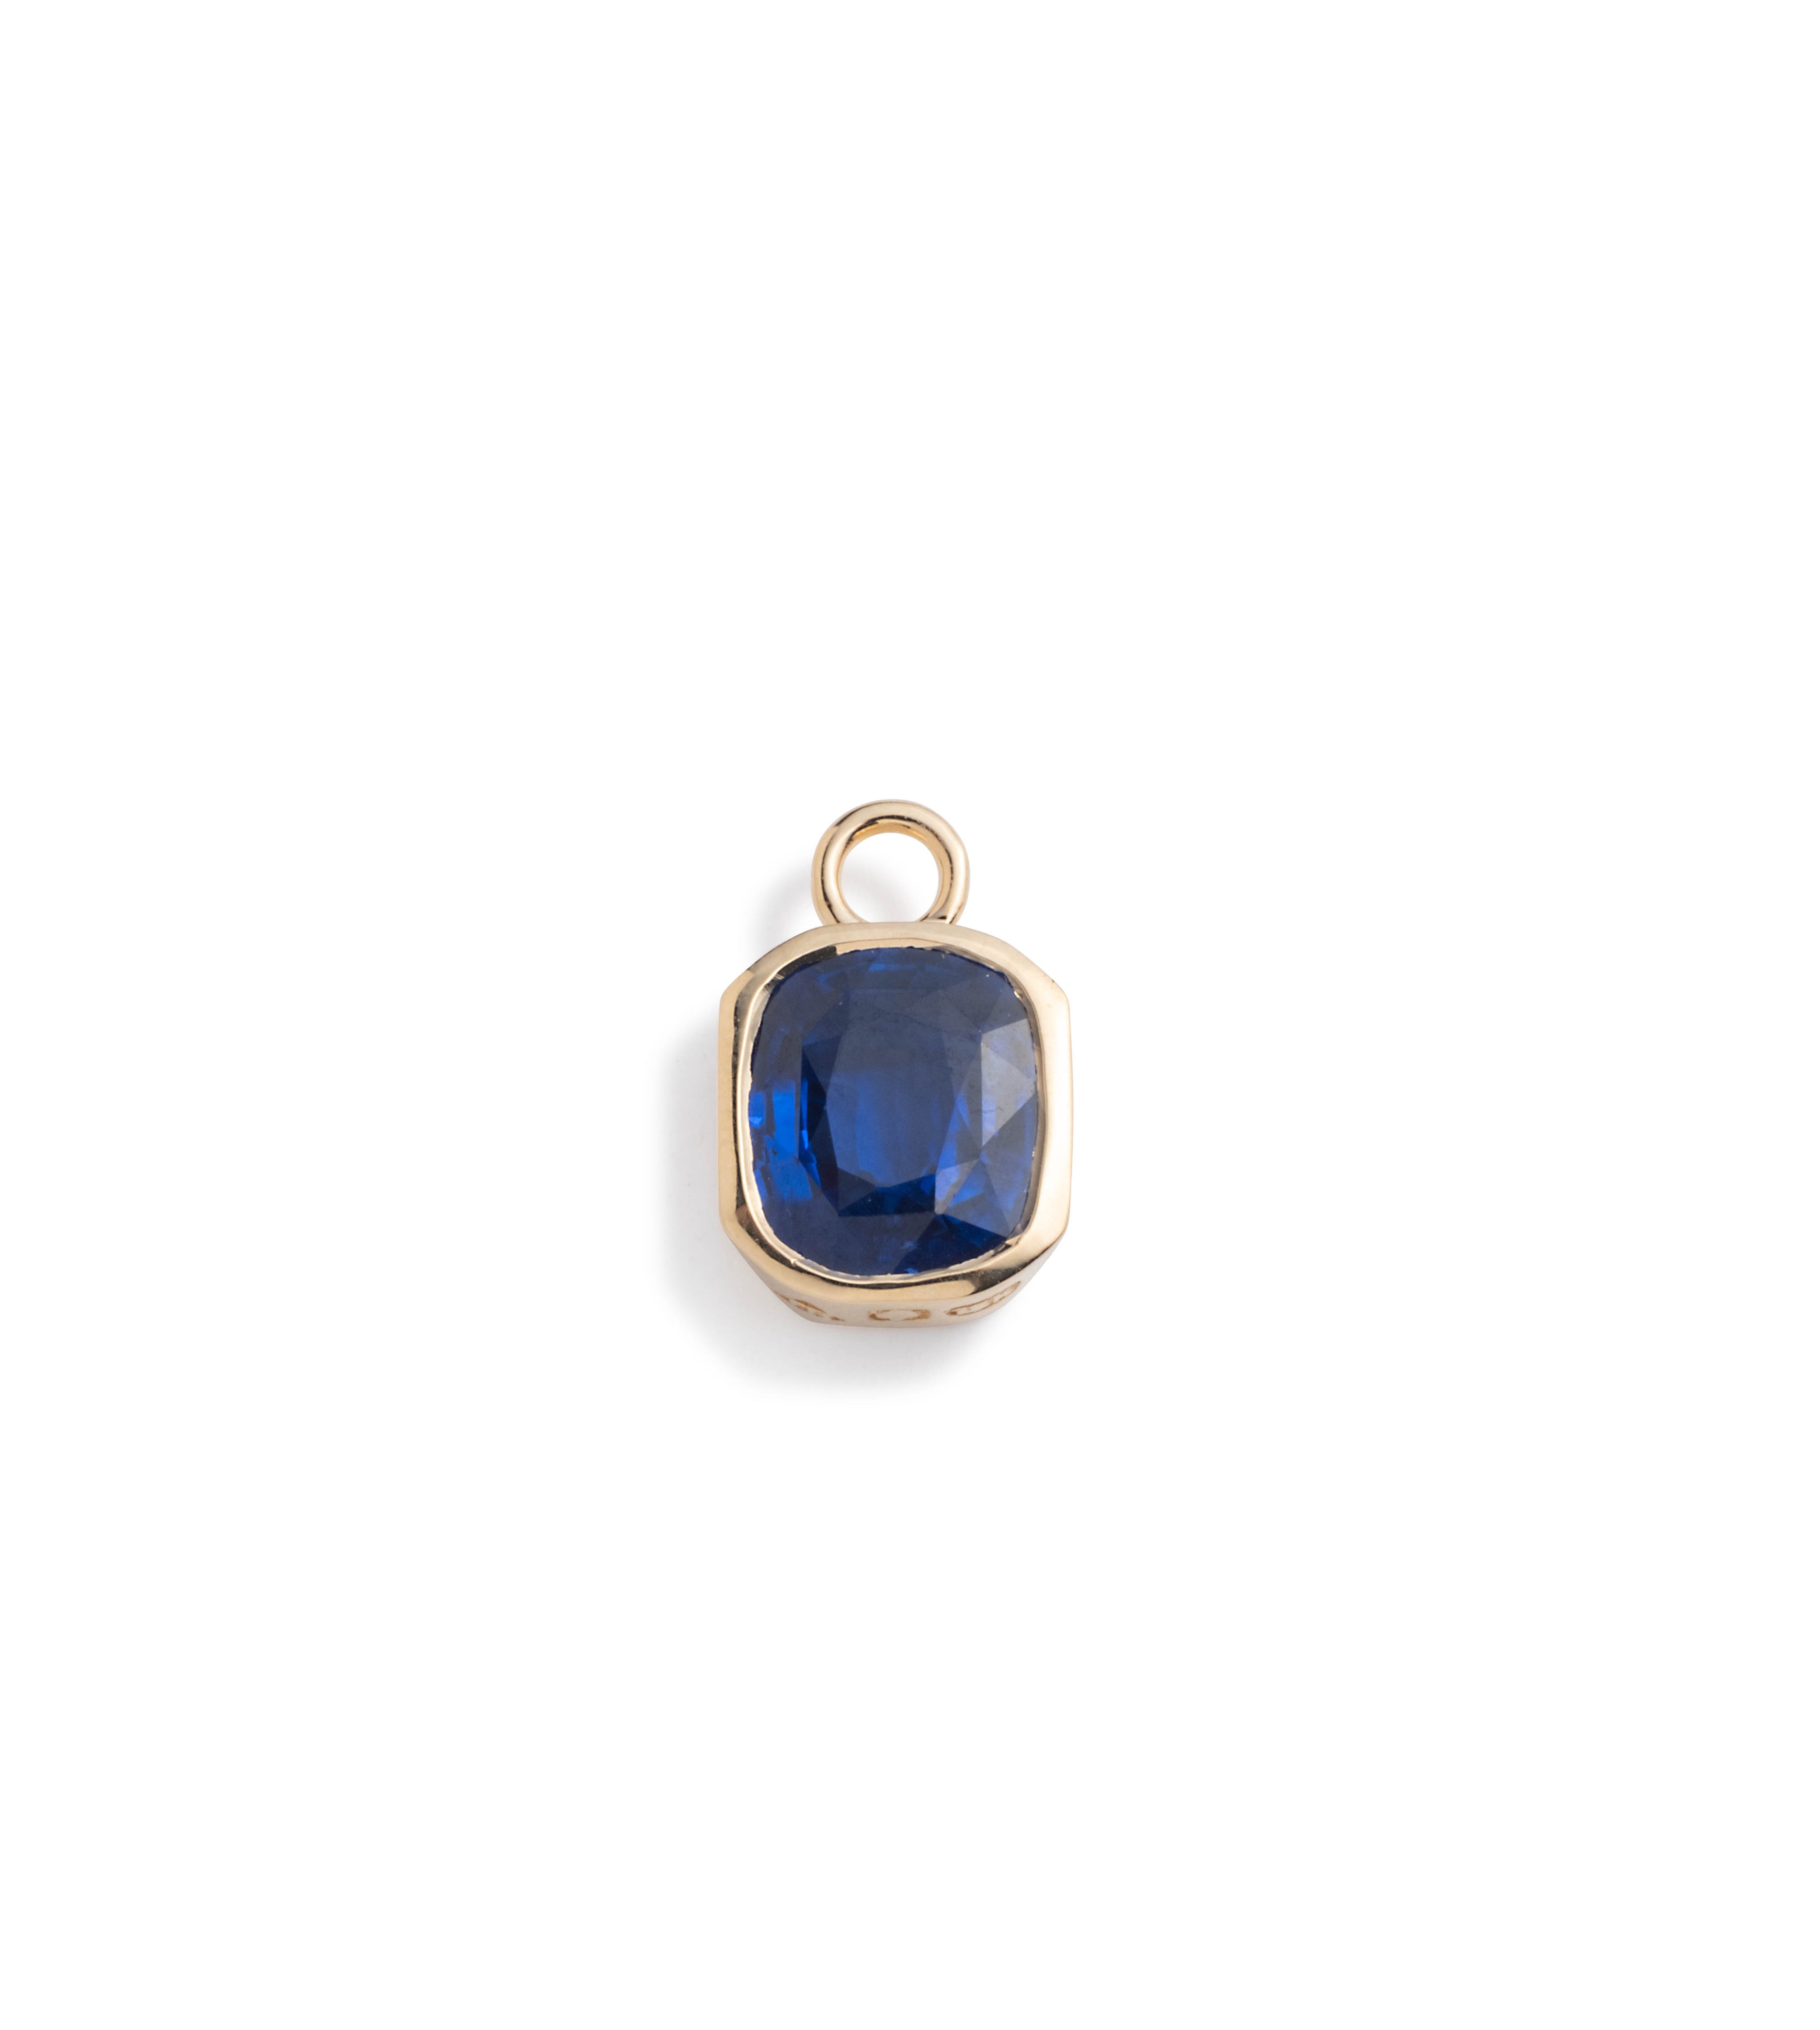 3.14ct Blue Sapphire - Reverie : One of A Kind Gemstone Pendant